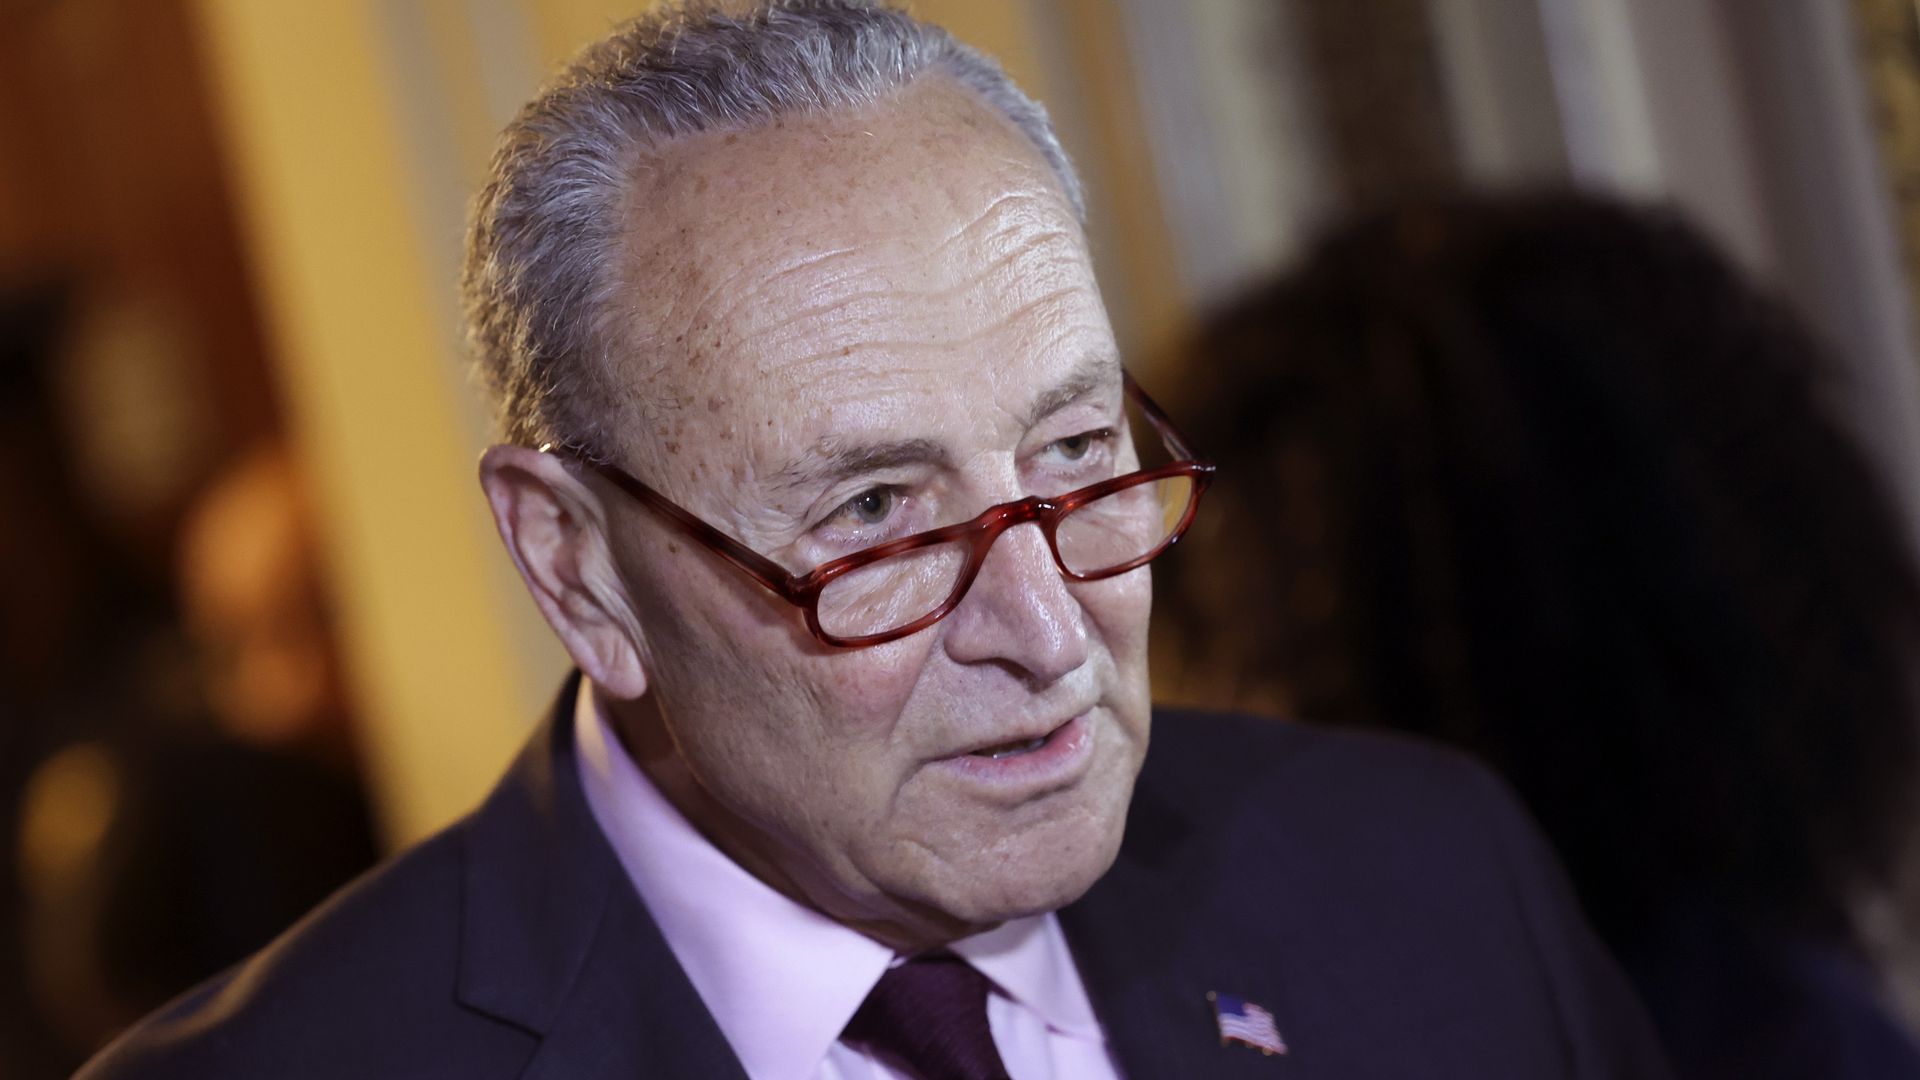 Photo of Chuck Schumer's face